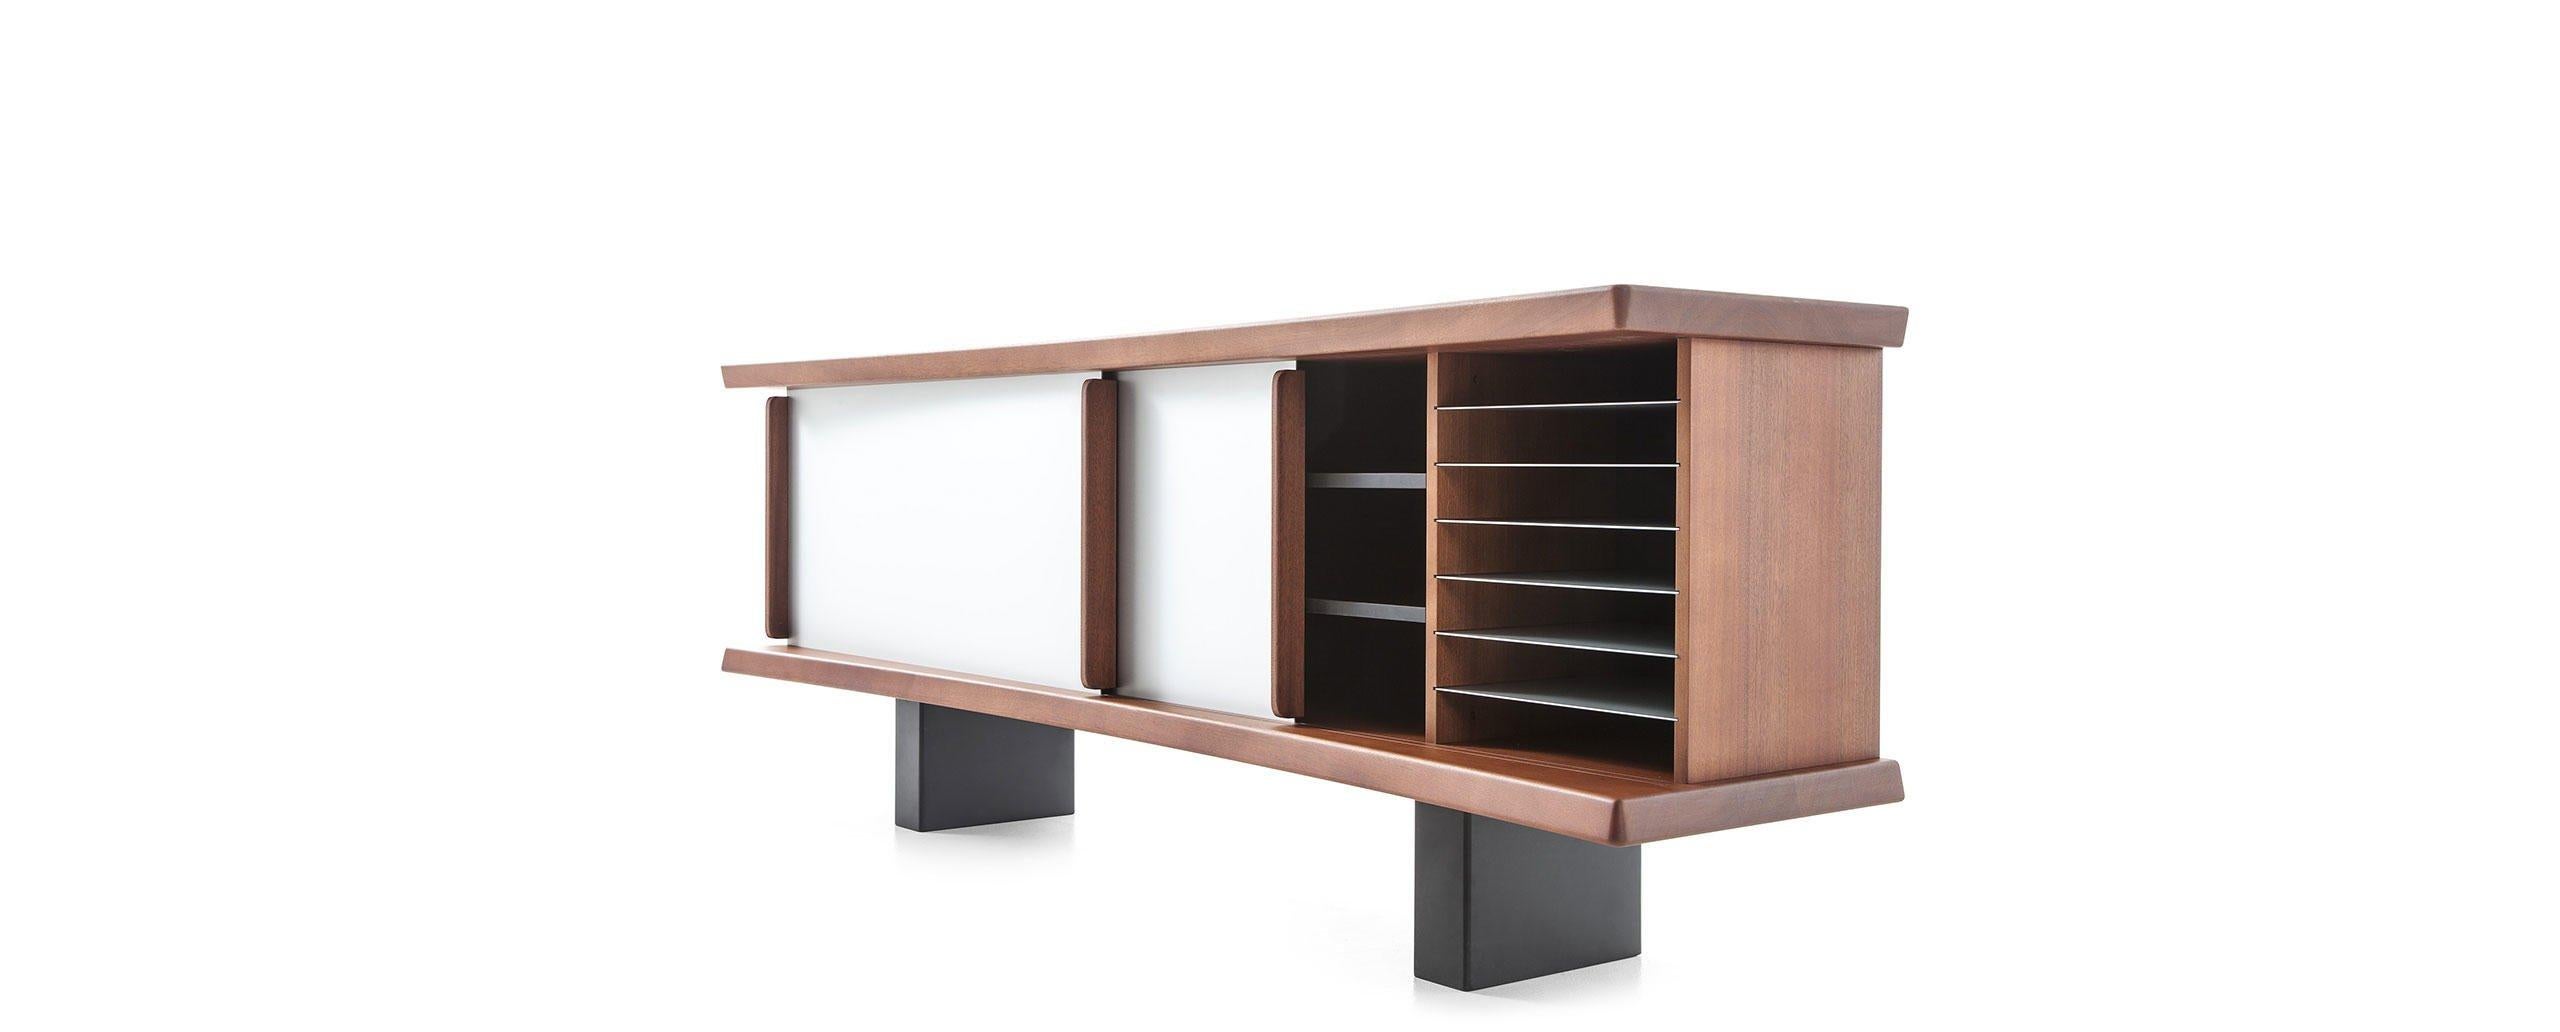 Storage unit designed by Charlotte Perriand in 1939. Relaunched in 2014.
Manufactured by Cassina in Italy.

Part of the Cassina collection since 2004, the Riflesso storage unit created in 1958 by Charlotte Perriand in association with Steph Simon